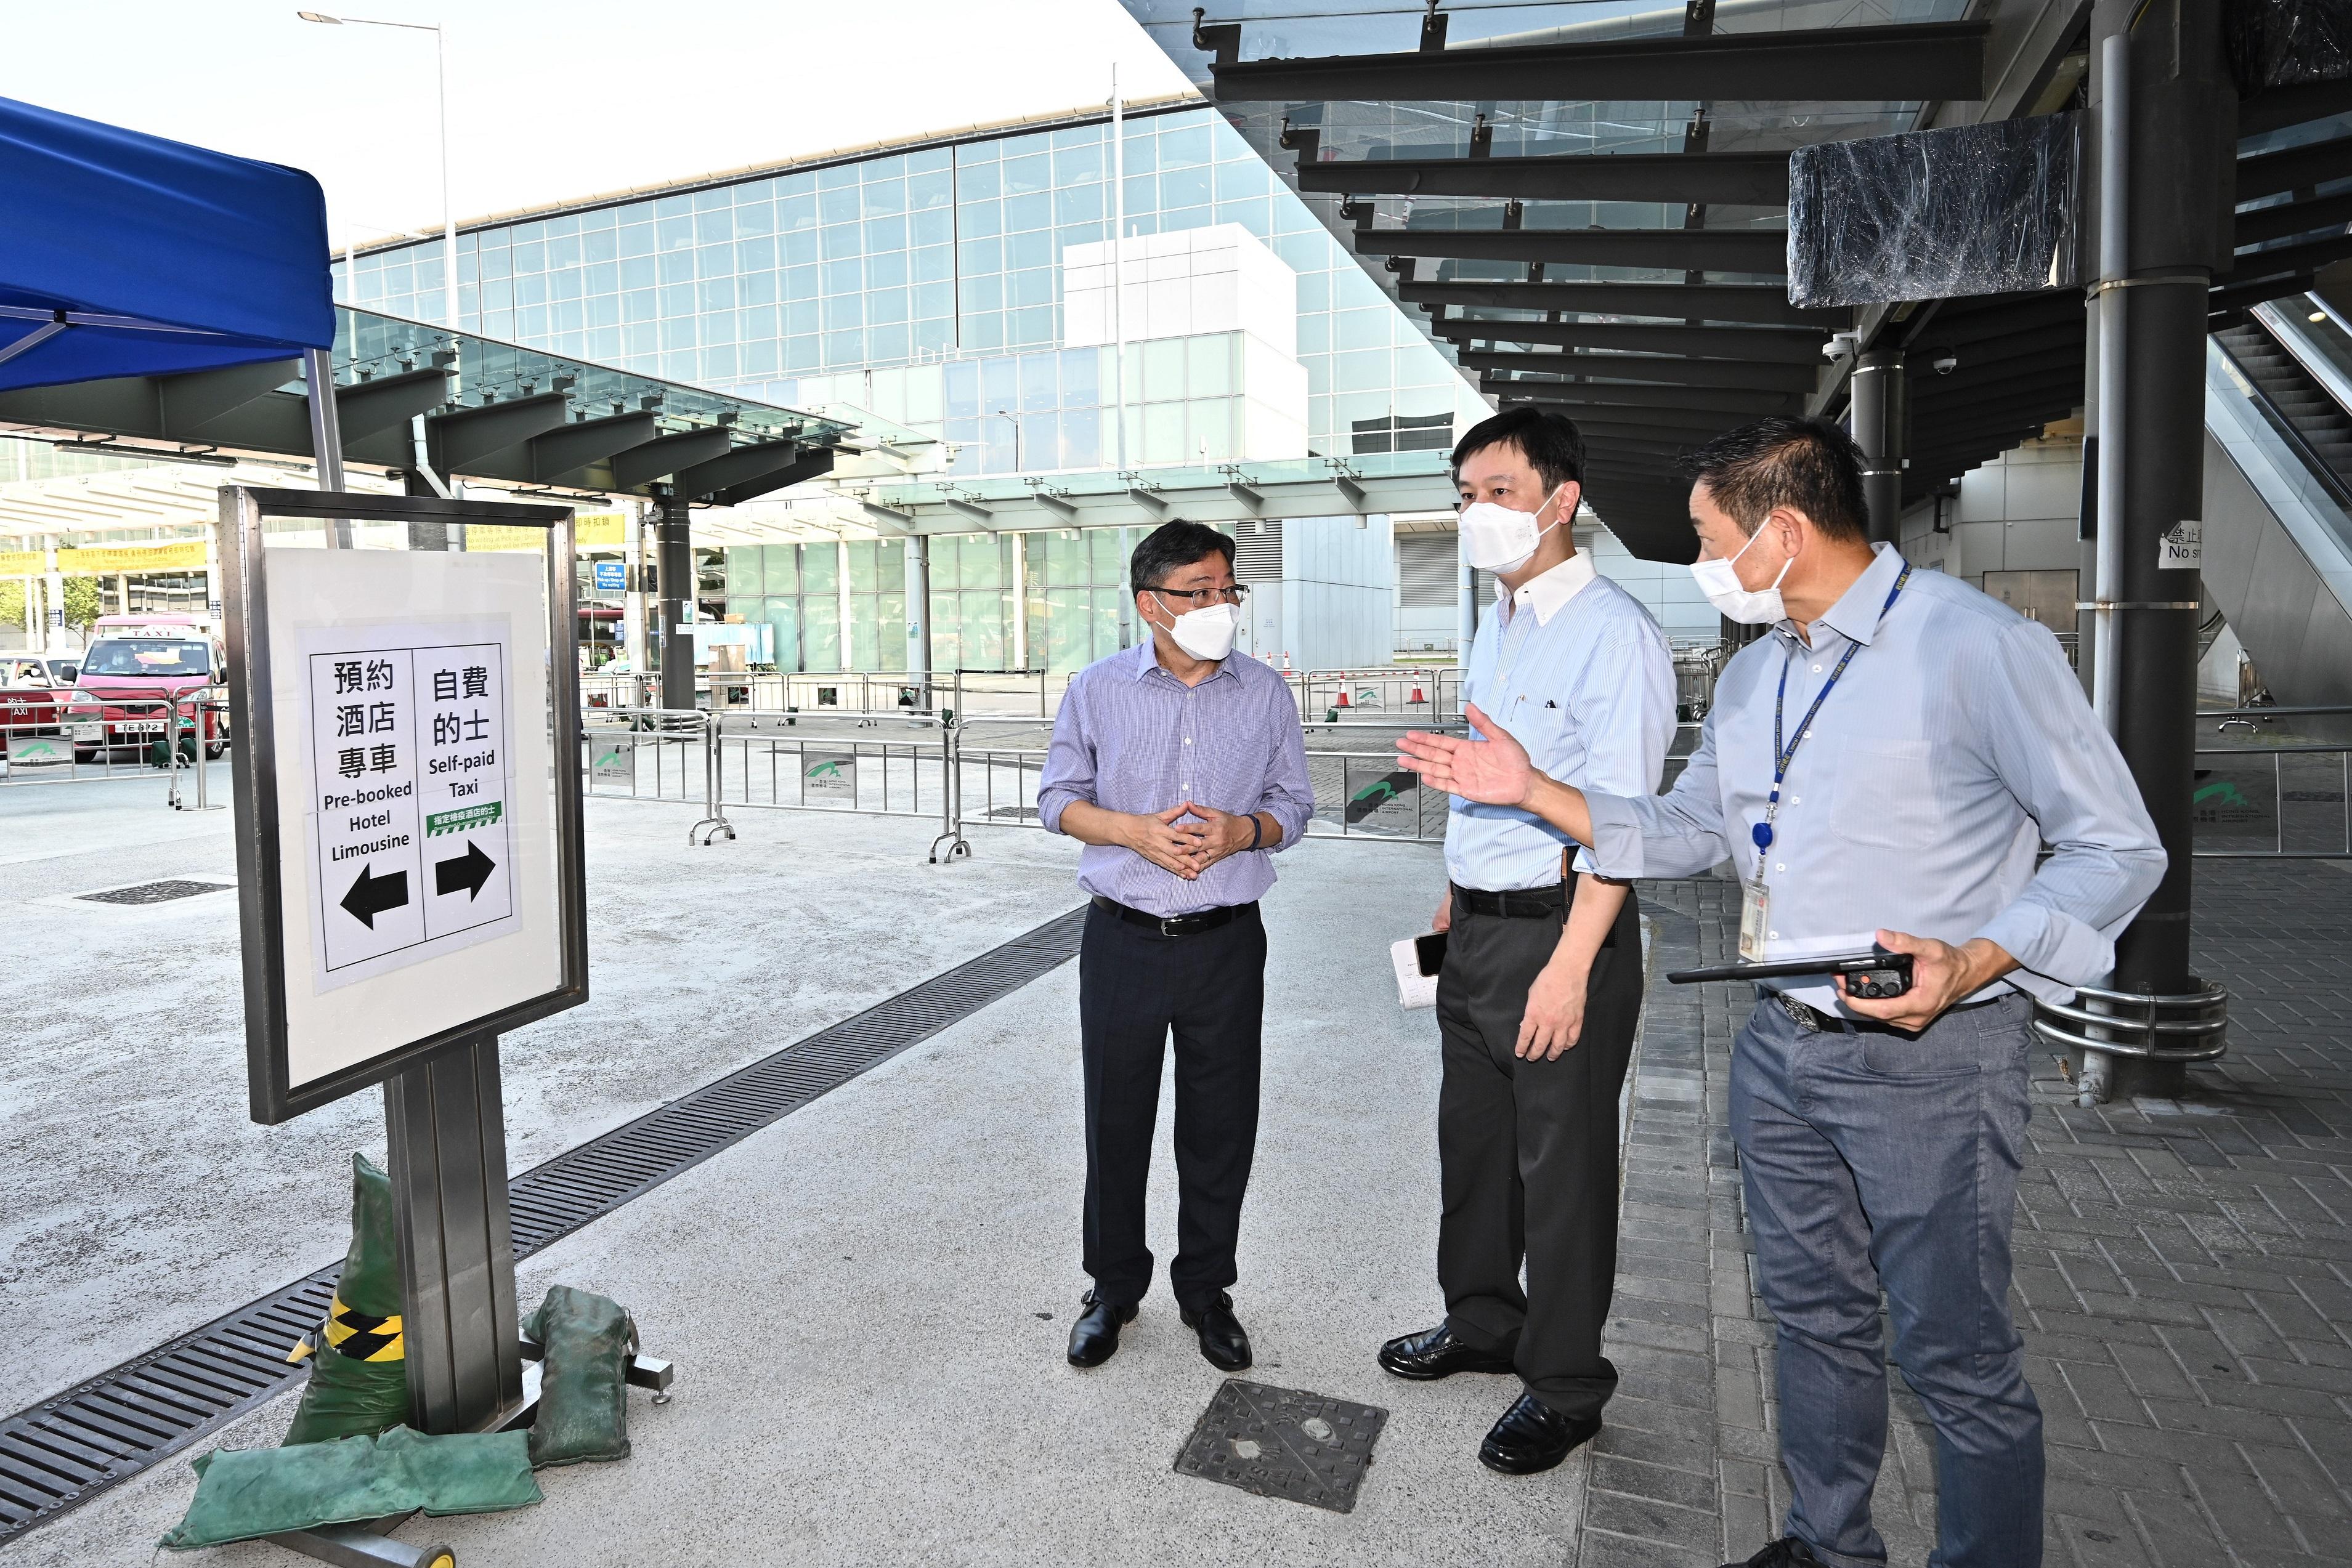 The Secretary for Transport and Logistics, Mr Lam Sai-hung, and the Deputy Secretary for Health (Special Duties), Mr Vincent Fung, visited Hong Kong International Airport this morning (July 25) to view the latest arrangements for point-to-point transport services to convey inbound persons to designated quarantine hotels. Photo shows Mr Lam (left) and Mr Fung (centre) checking the signage about designated transport services.